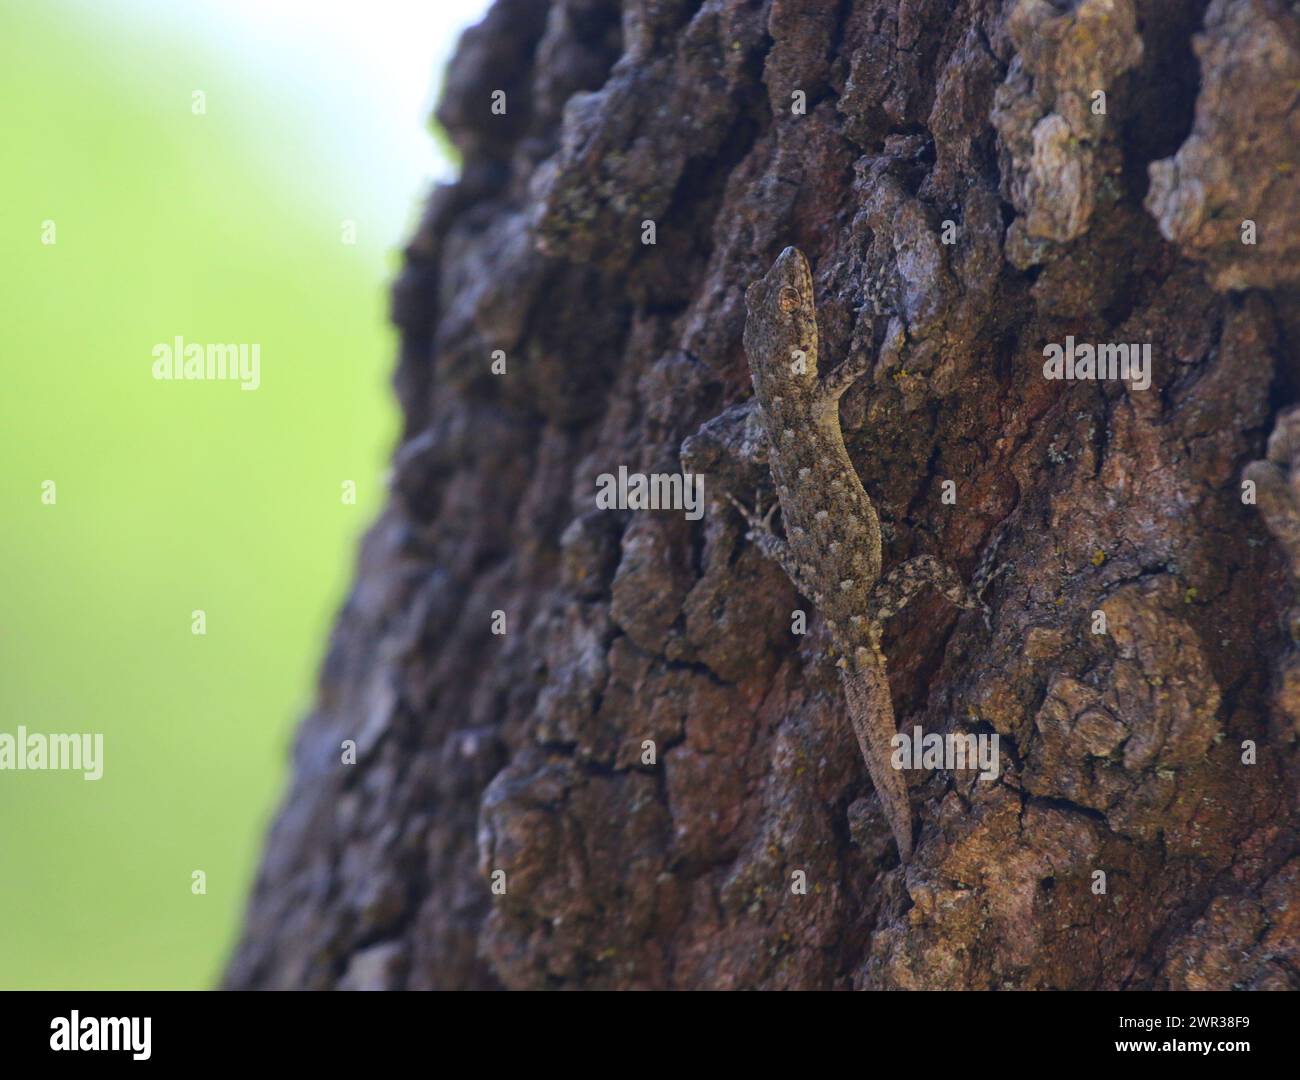 A Kotschy's Gecko (Mediodactylus kotschyi) on the trunk of a tree shot on the island of Kythira in Greece. Stock Photo